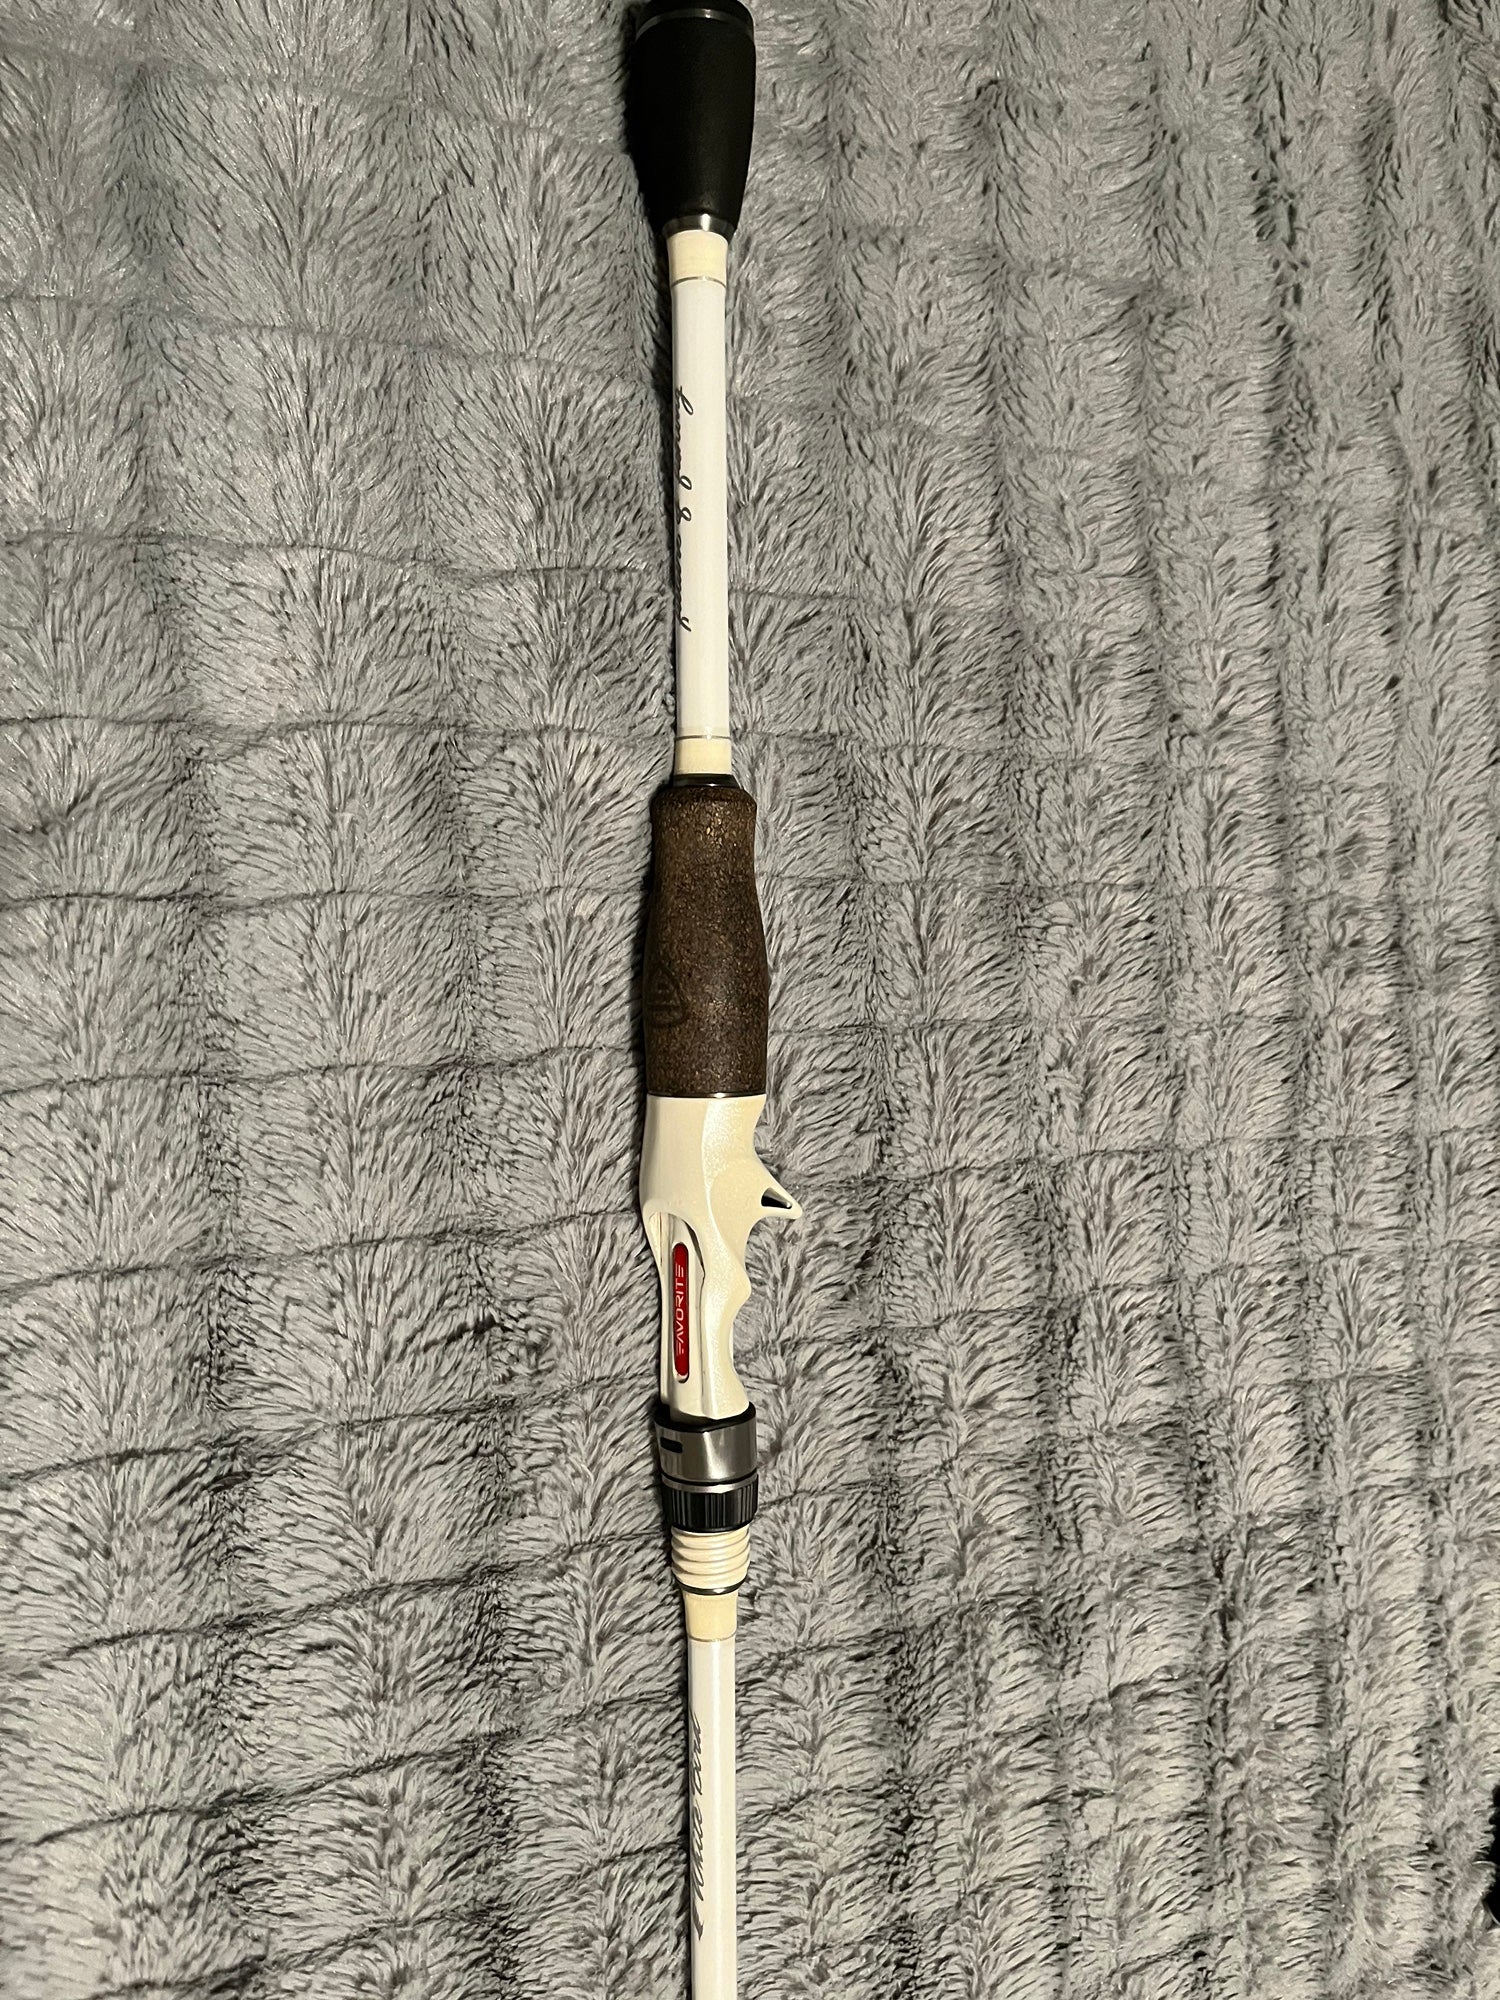 Favorite white bird 7,0 fast action casting rod